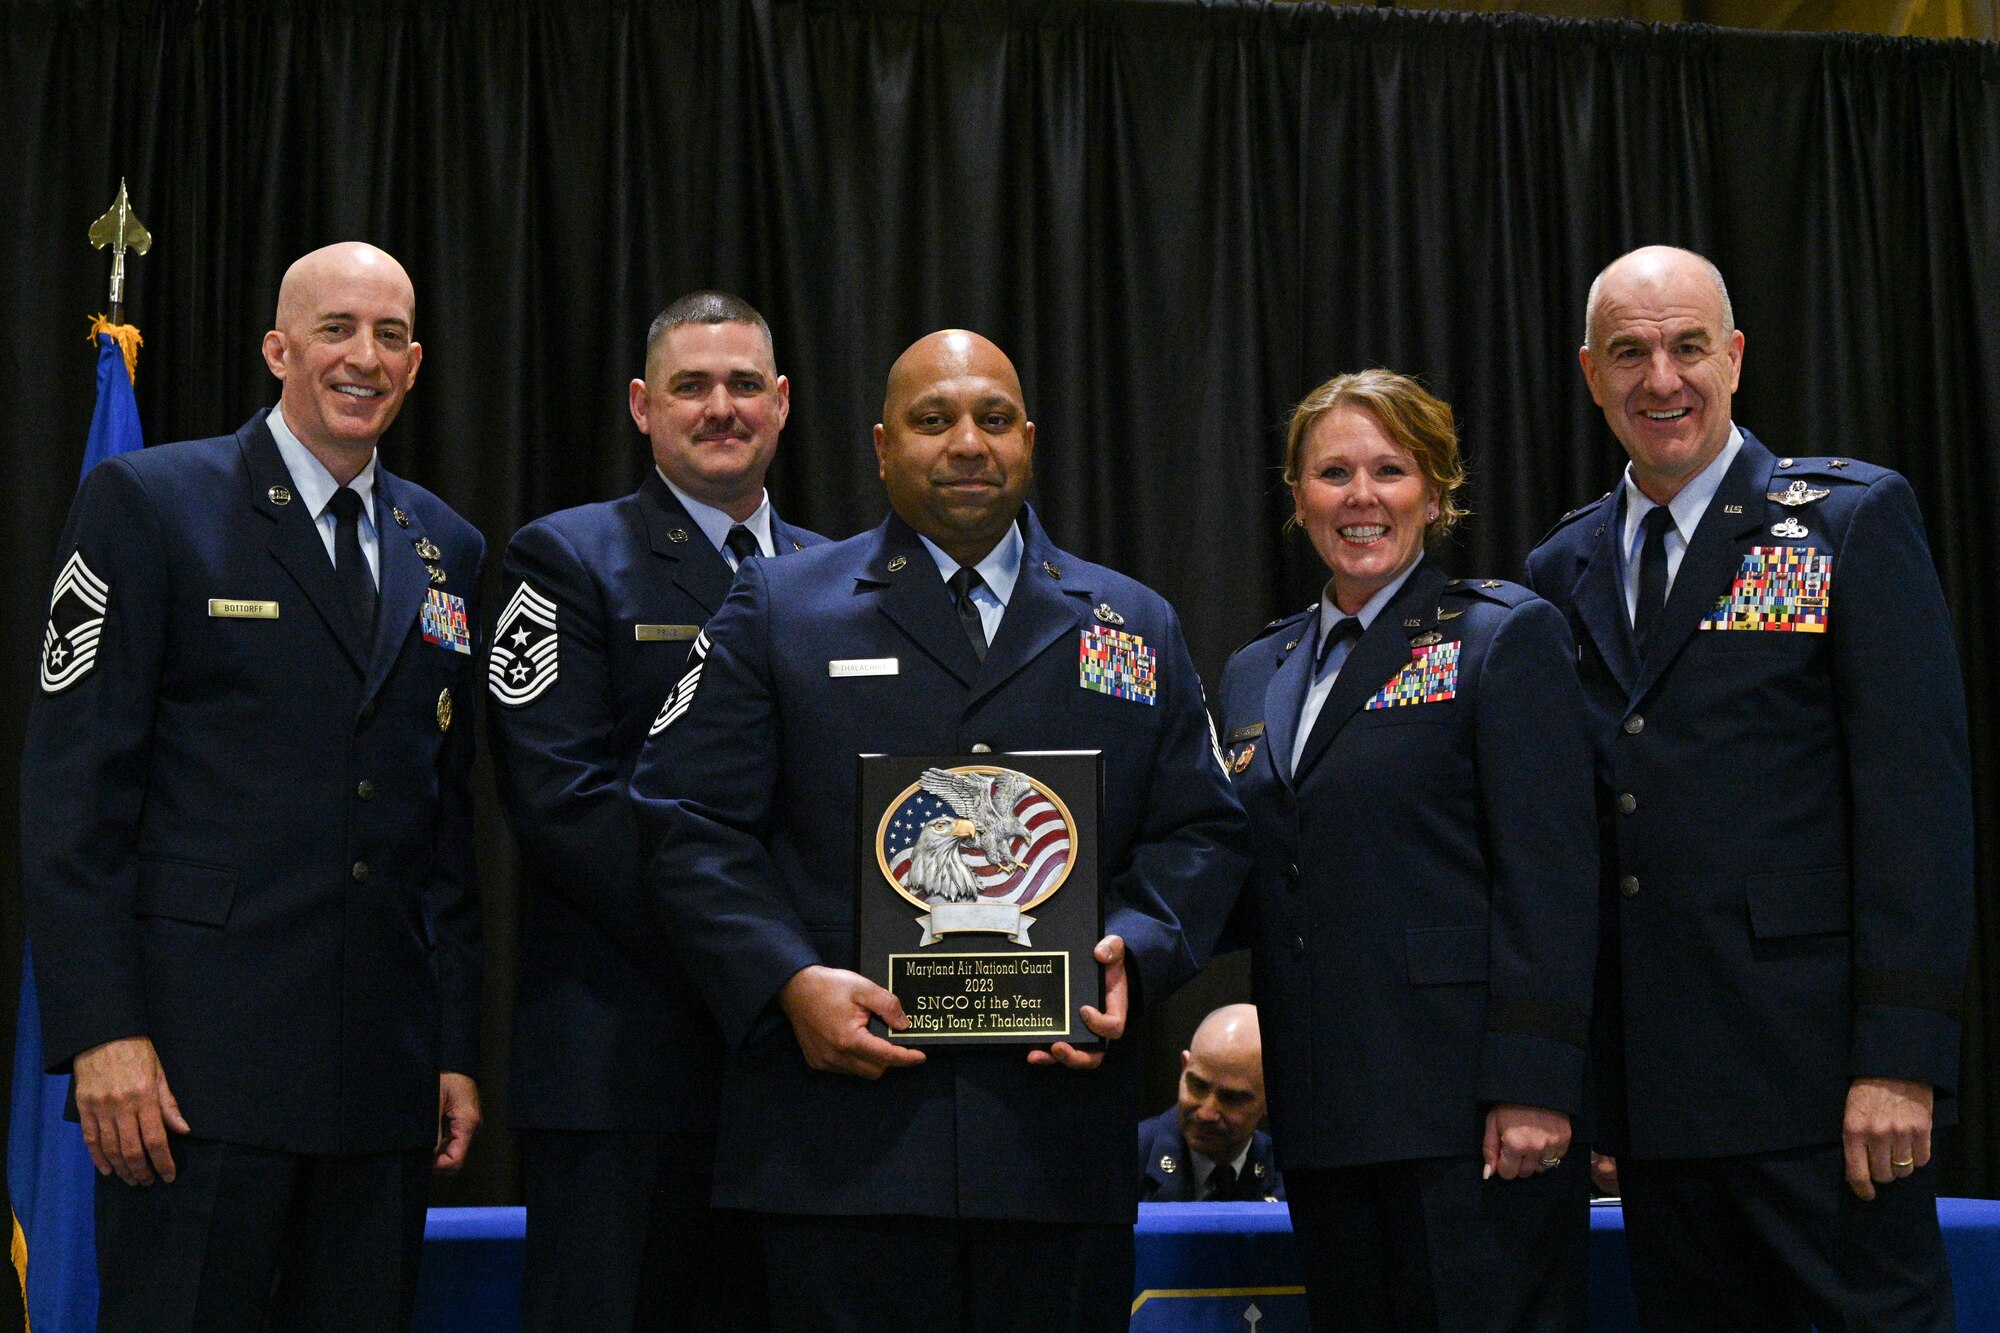 U.S. Air Force Senior Master Sgt. Tony F. Thalachira, 175th Wing senior non-commissioned officer of the Year, Maryland Air National Guard, receives a plaque at Warfield Air National Guard Base, Middle River, Maryland, during the 2022 Airman Recognition Ceremony, December 4, 2022.